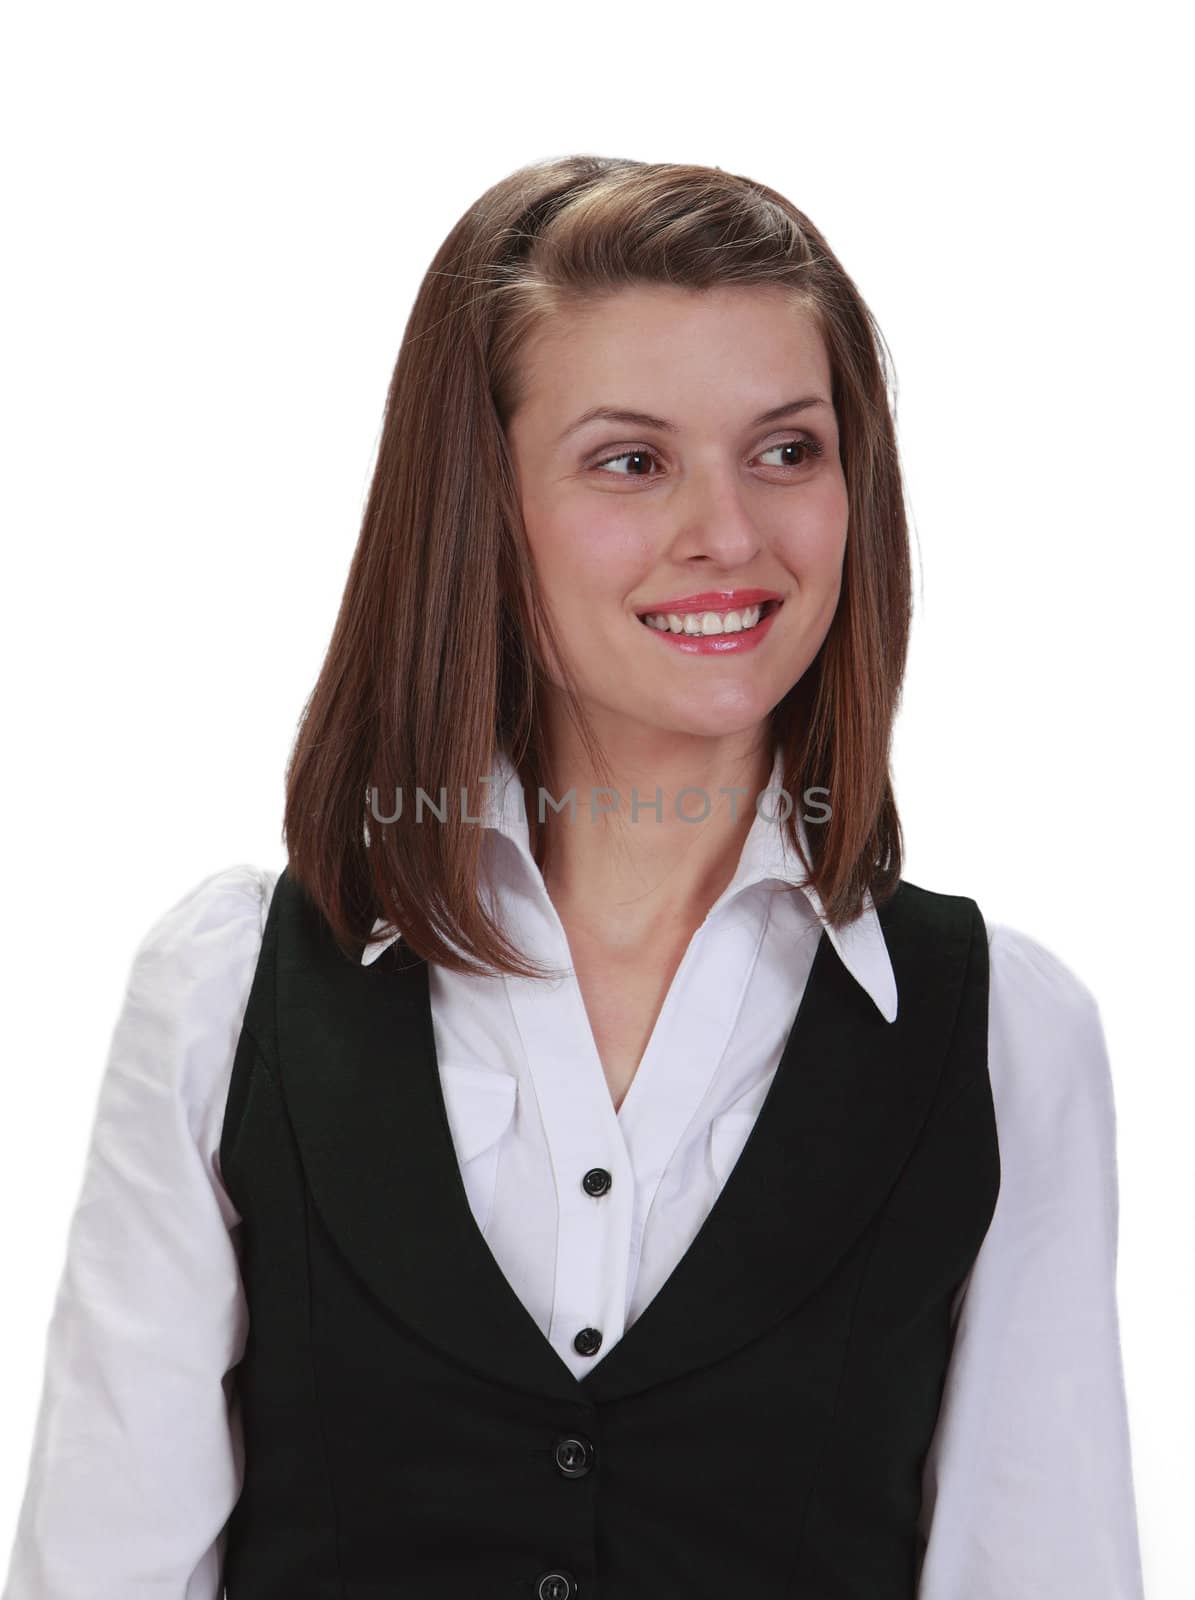 Portrait of a young smilling woman isolated against a white background.